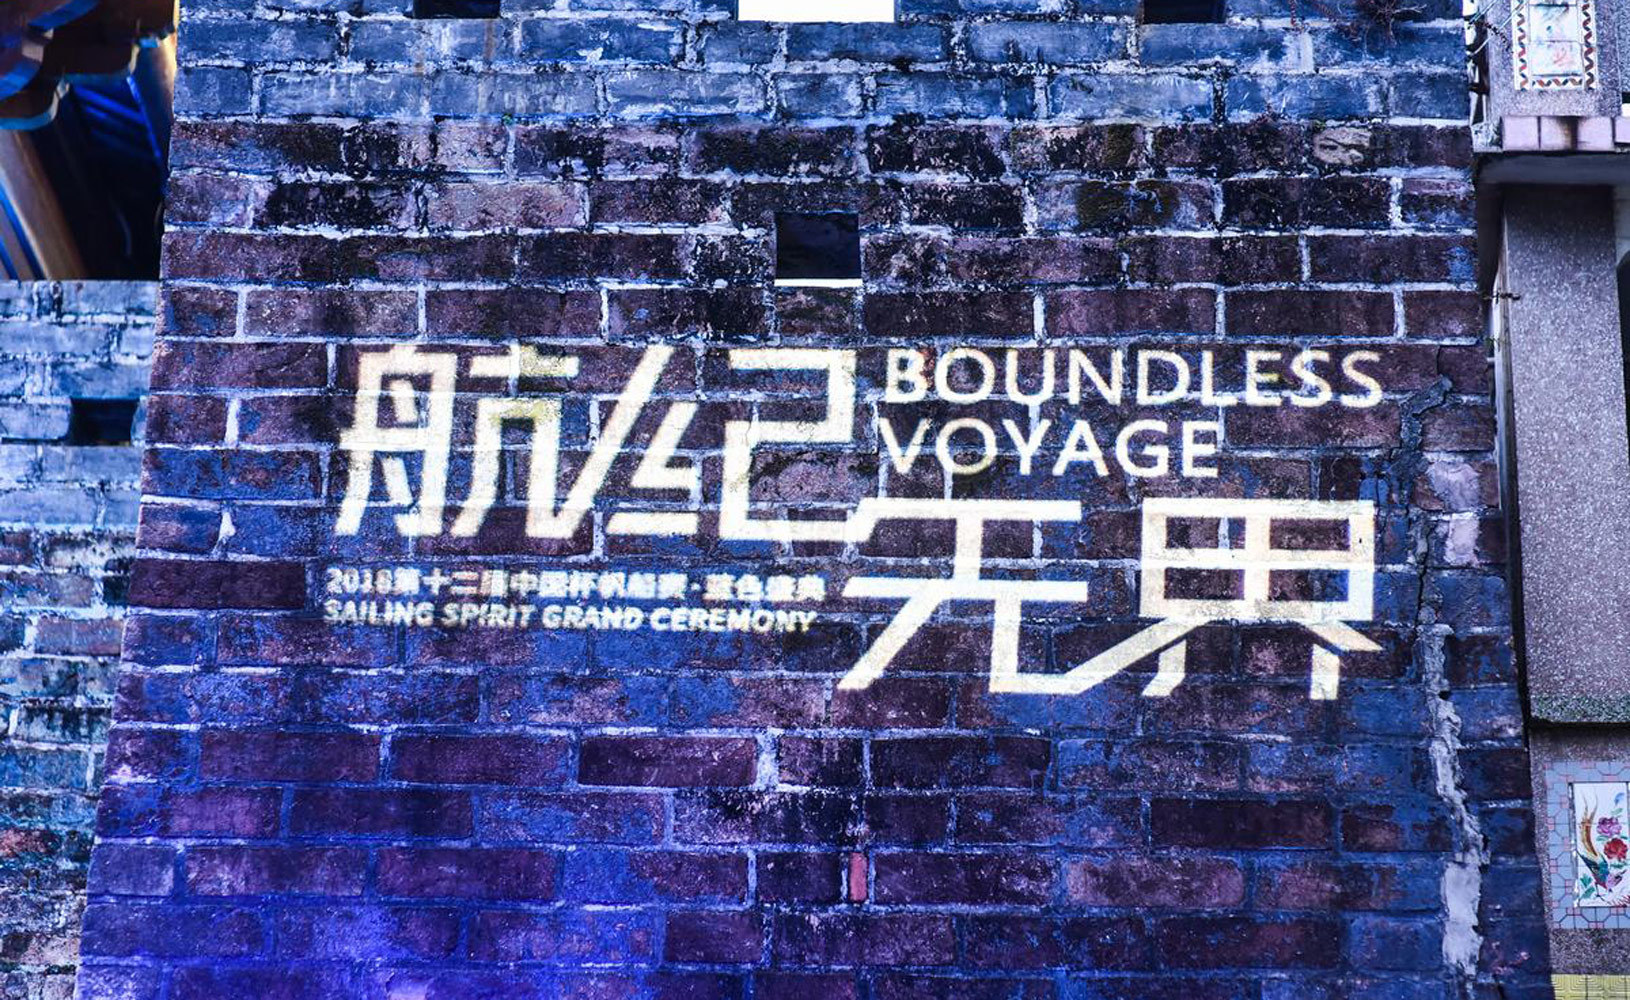 Boundless Navigation | The 12th China Cup Sailing Race Blue Ceremony